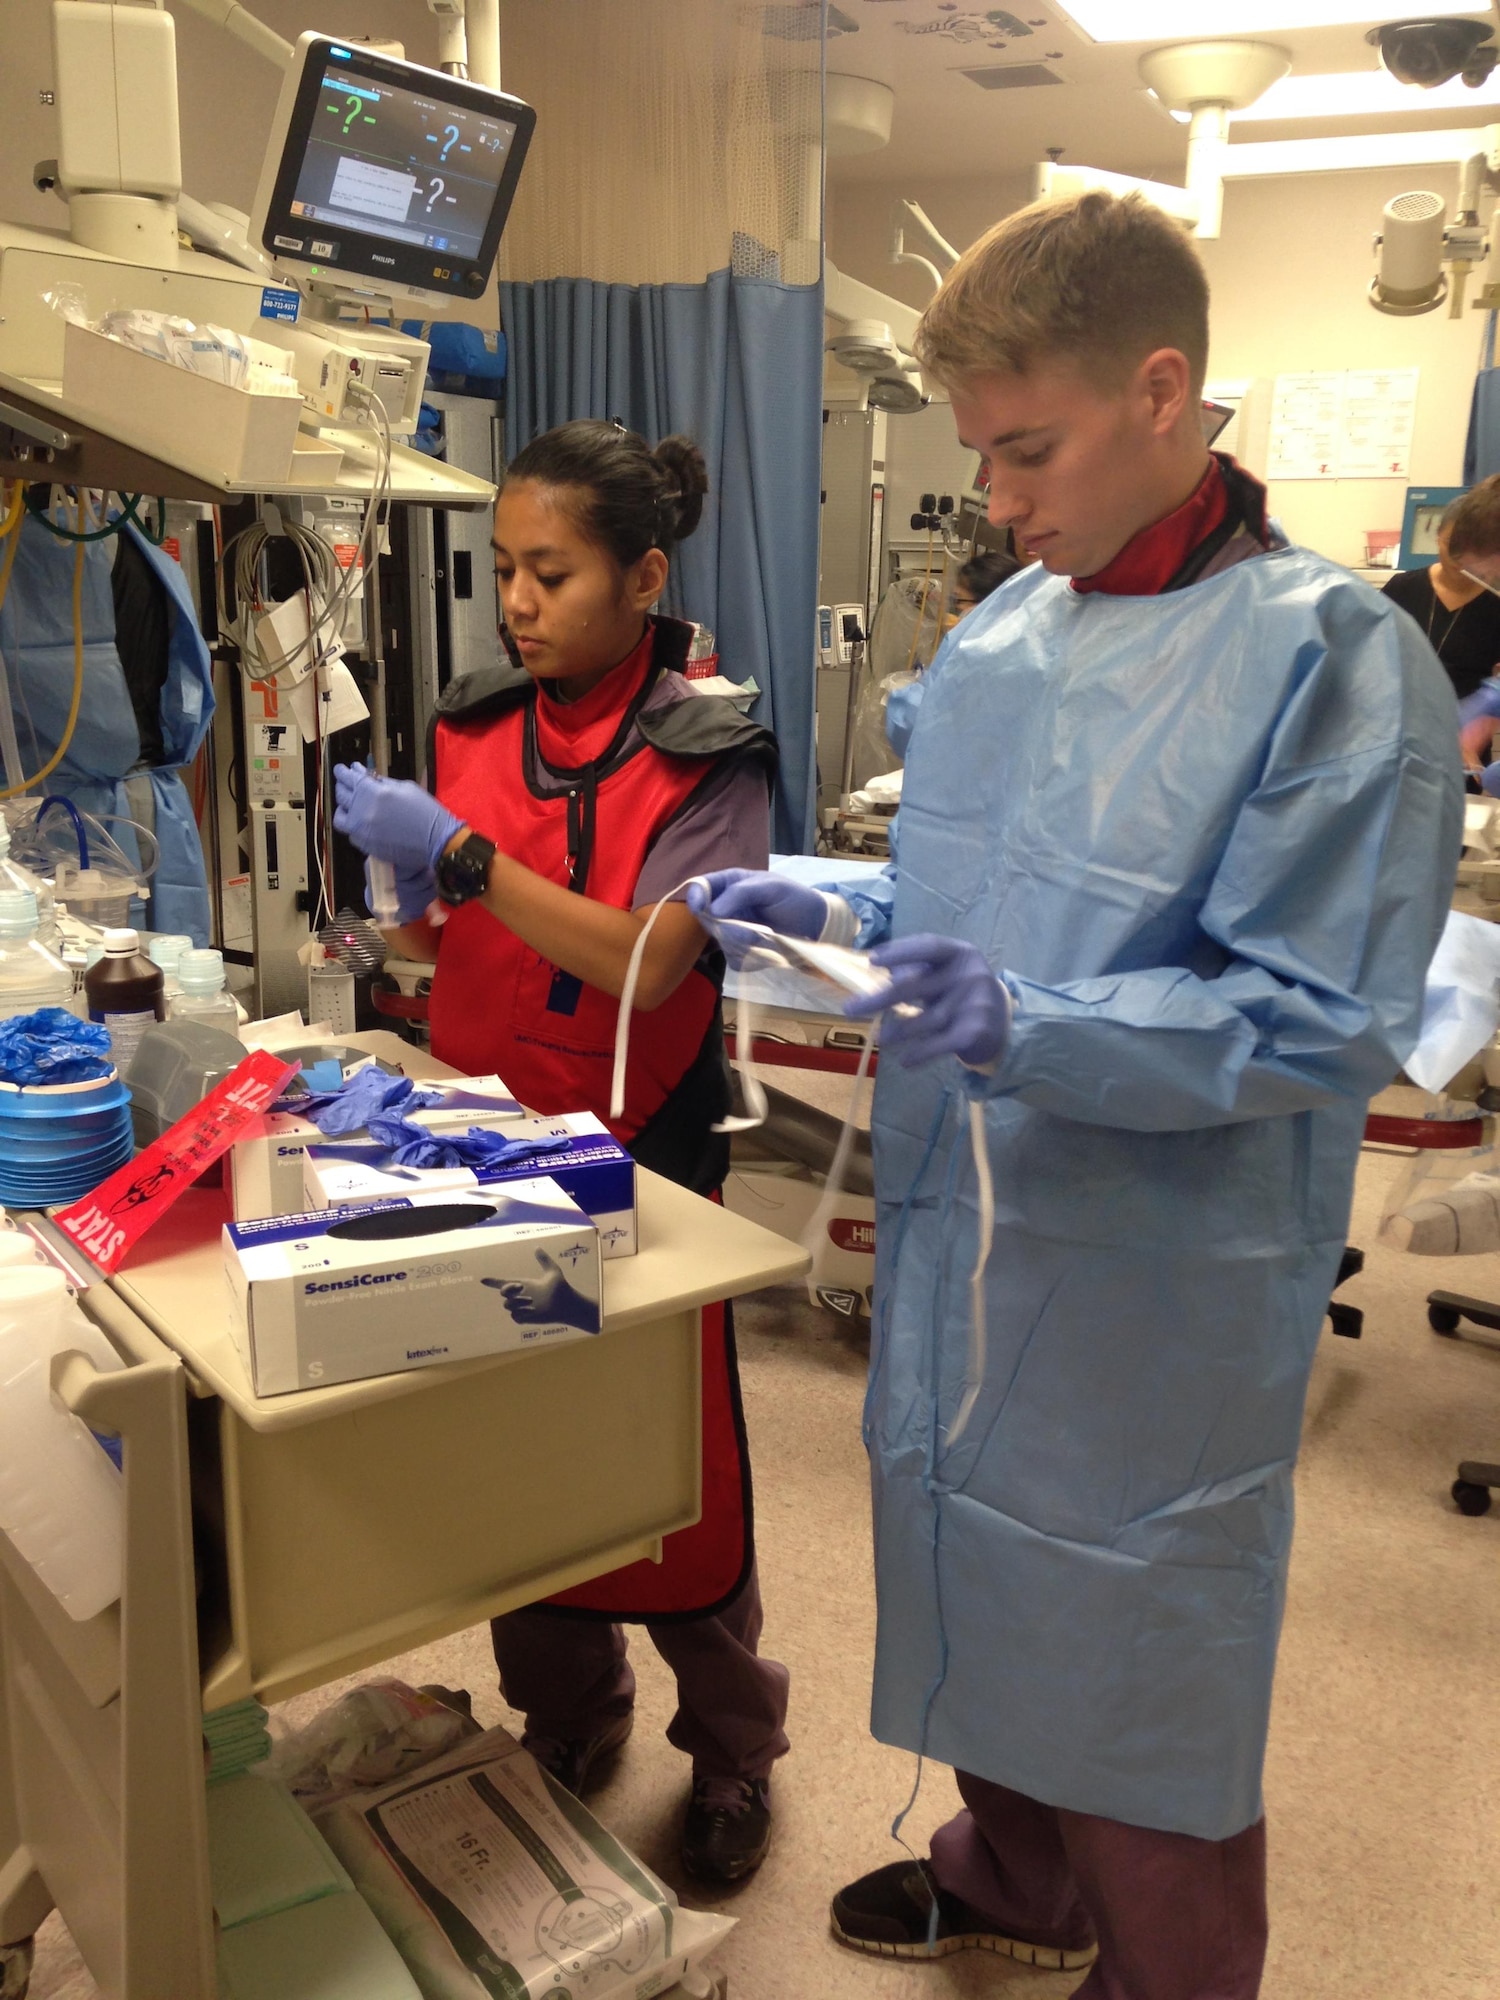 An emergency room nurse and a medical technician from Nellis Air Force Base, Nev., work in the University Medical Center of Southern Nevada’s emergency department during their training with the Sustained Medical and Readiness Trained (SMART) program. (U.S. Air Force photo)
